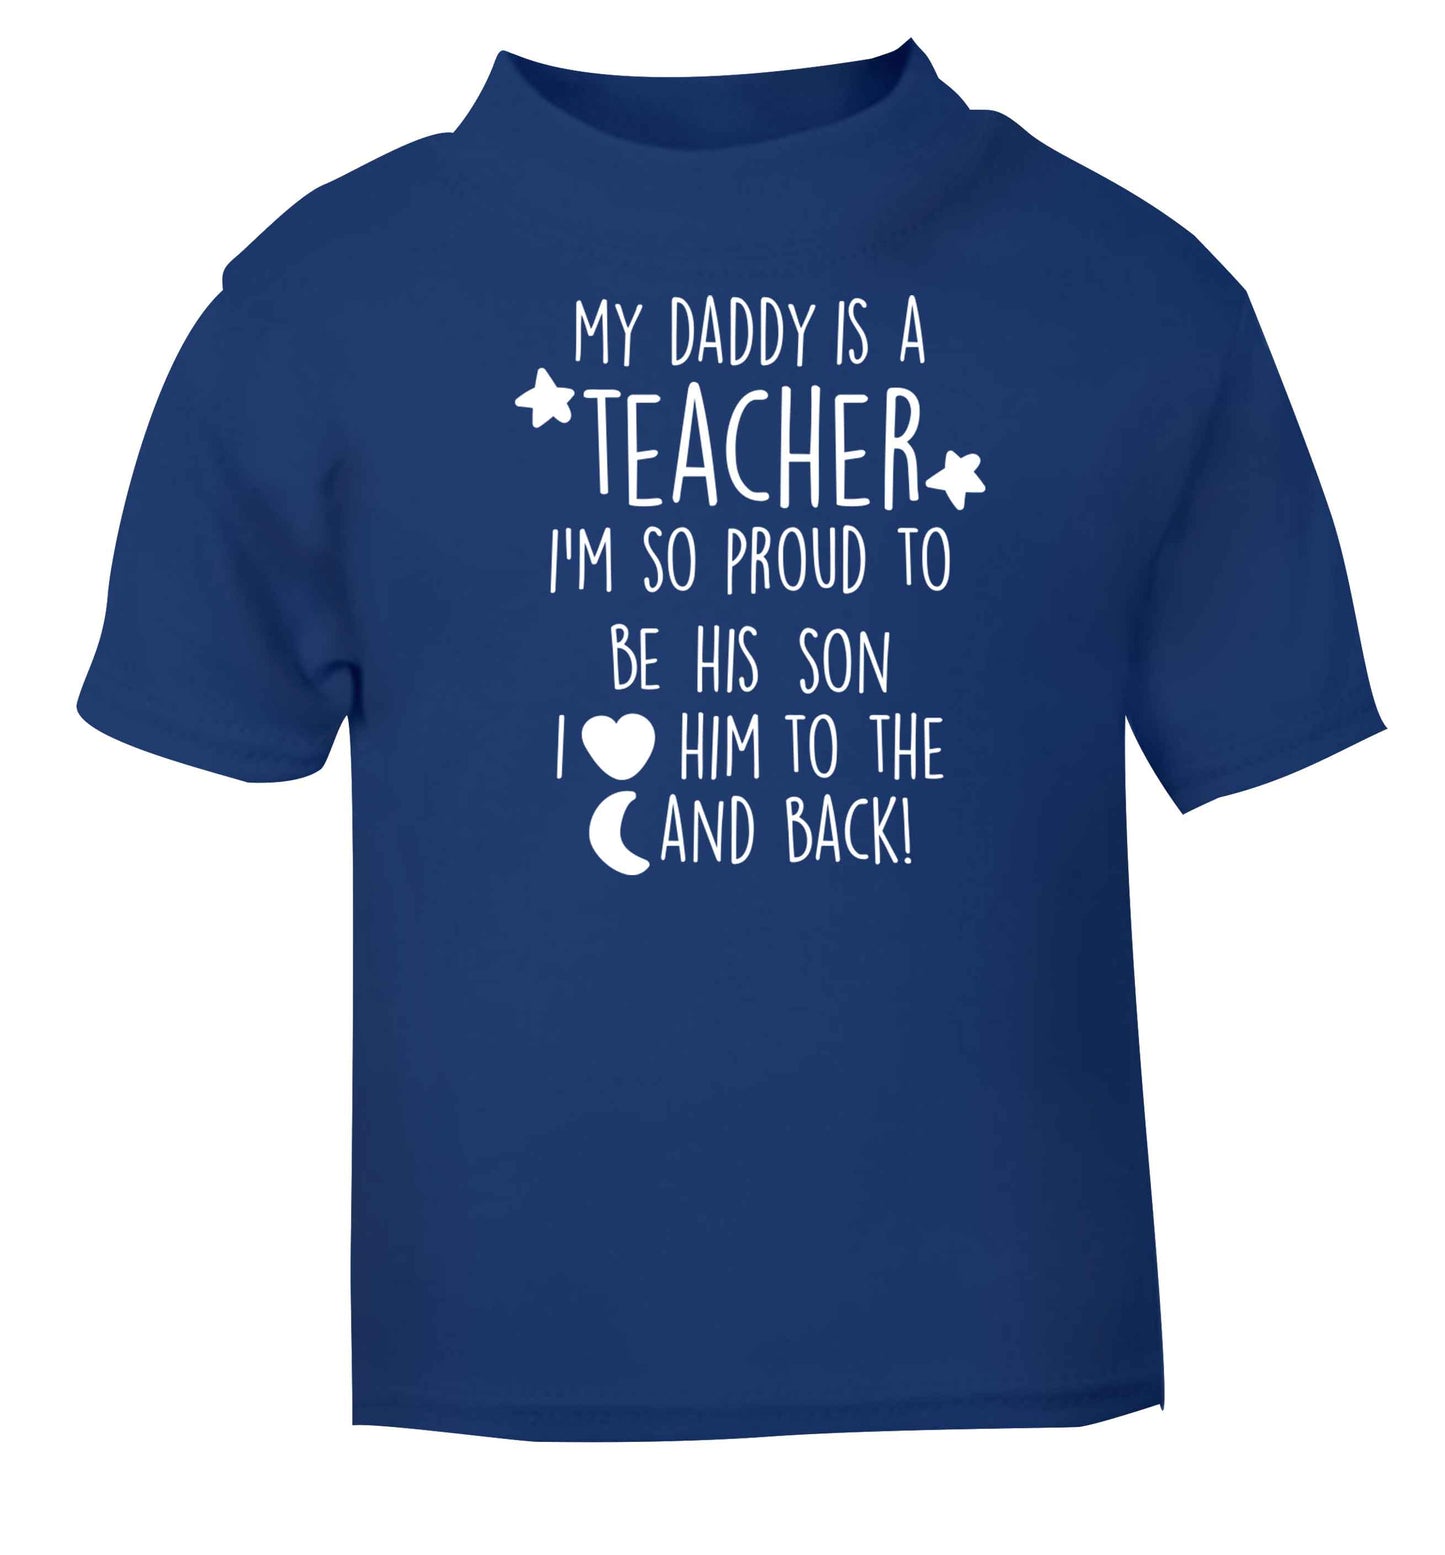 My daddy is a teacher I'm so proud to be his son I love her to the moon and back blue baby toddler Tshirt 2 Years